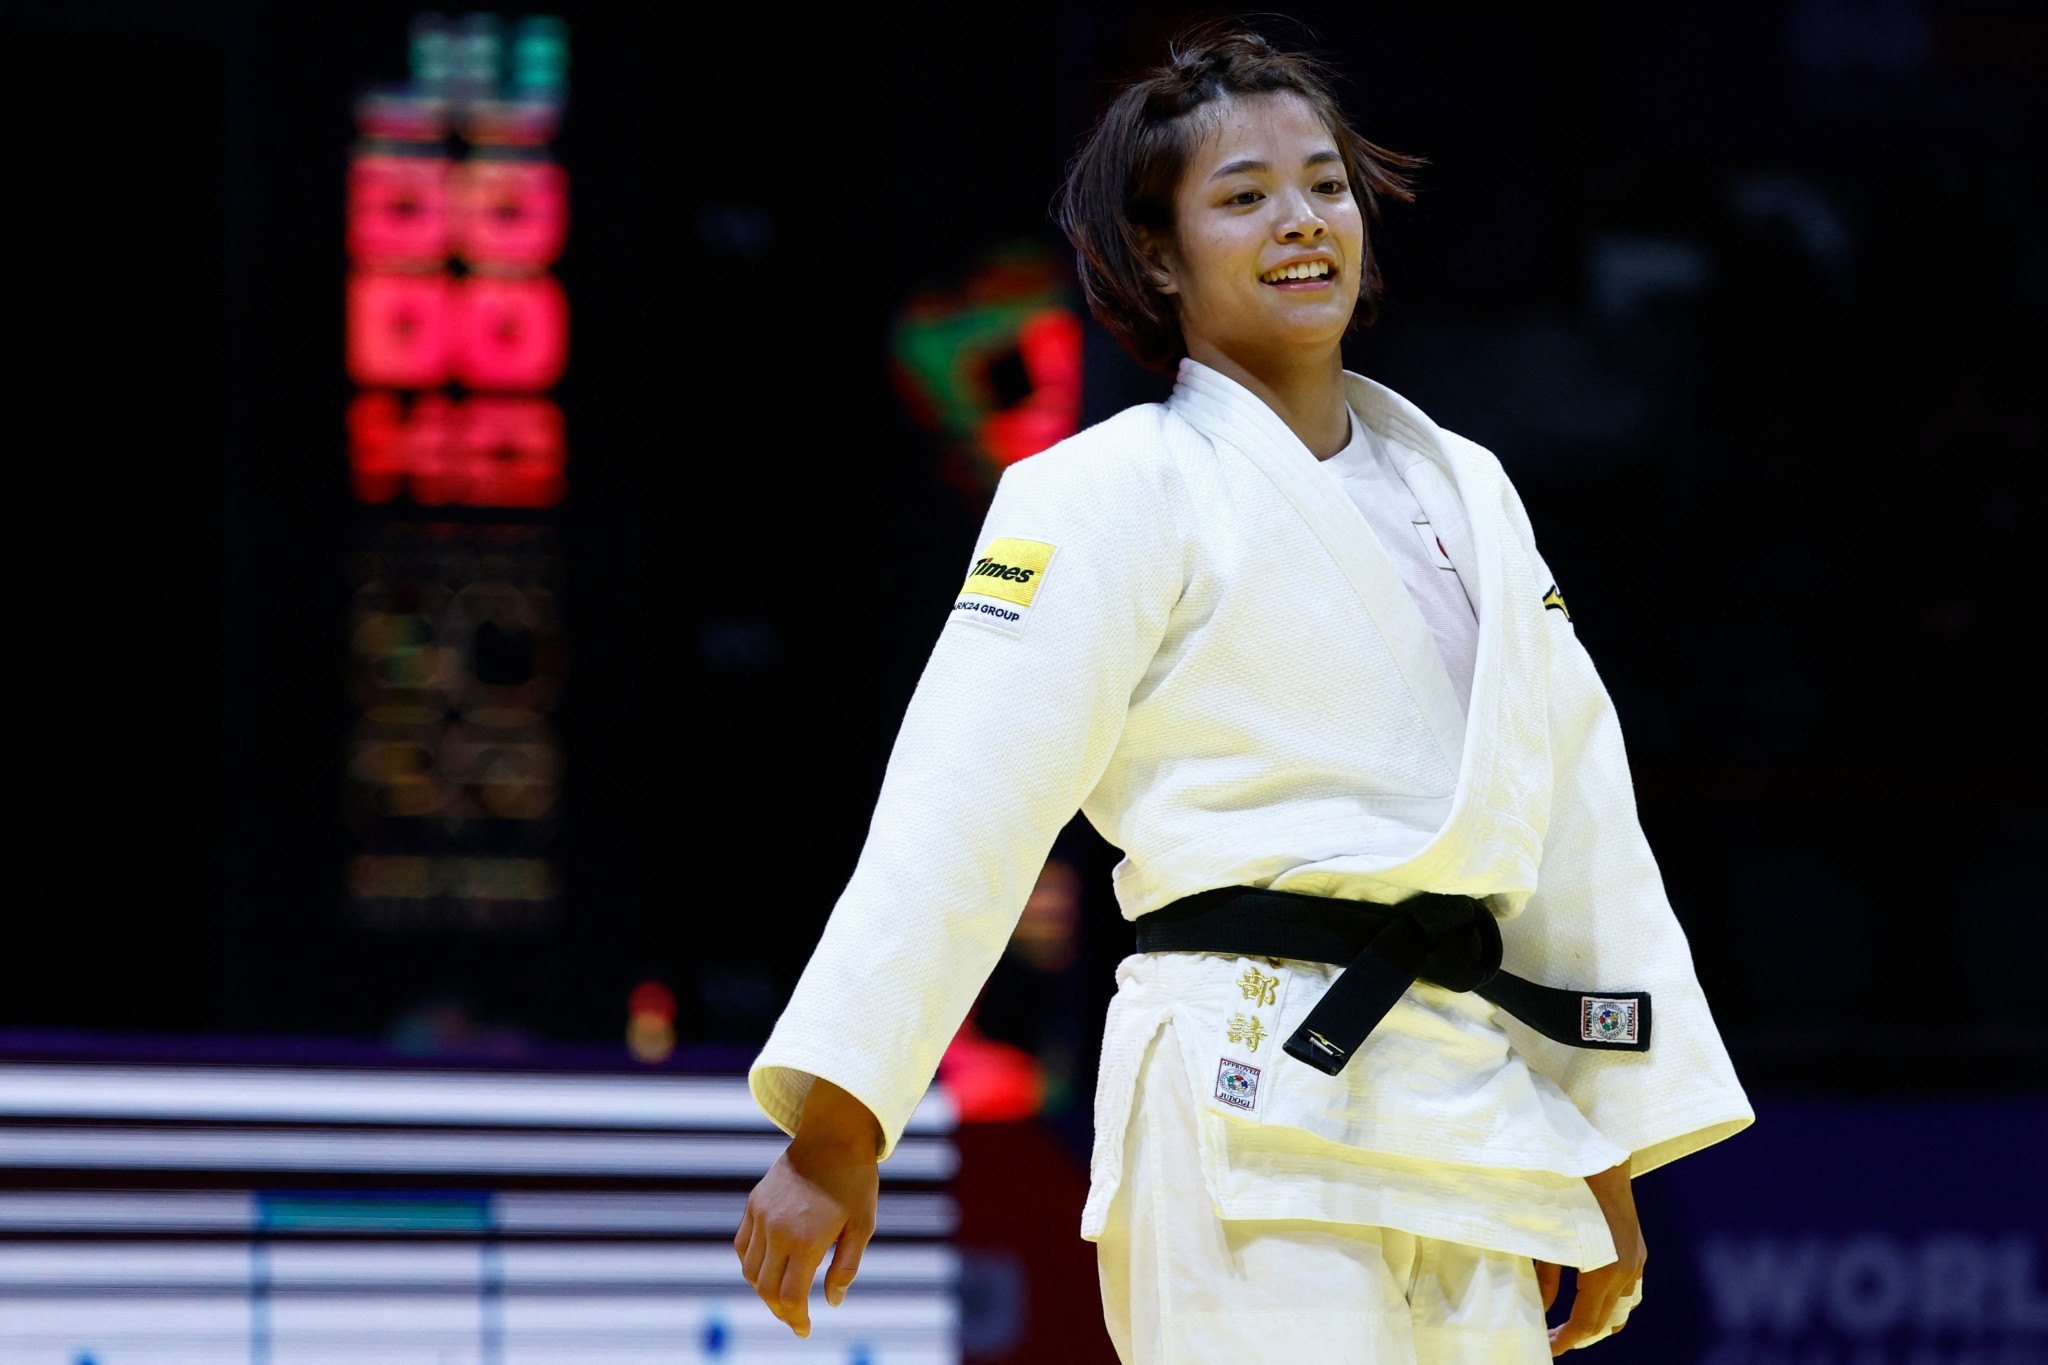 Uta Abe clinched the women's under-52kg title for a fourth time following a dominant performance at the World Judo Championships ©Getty Images